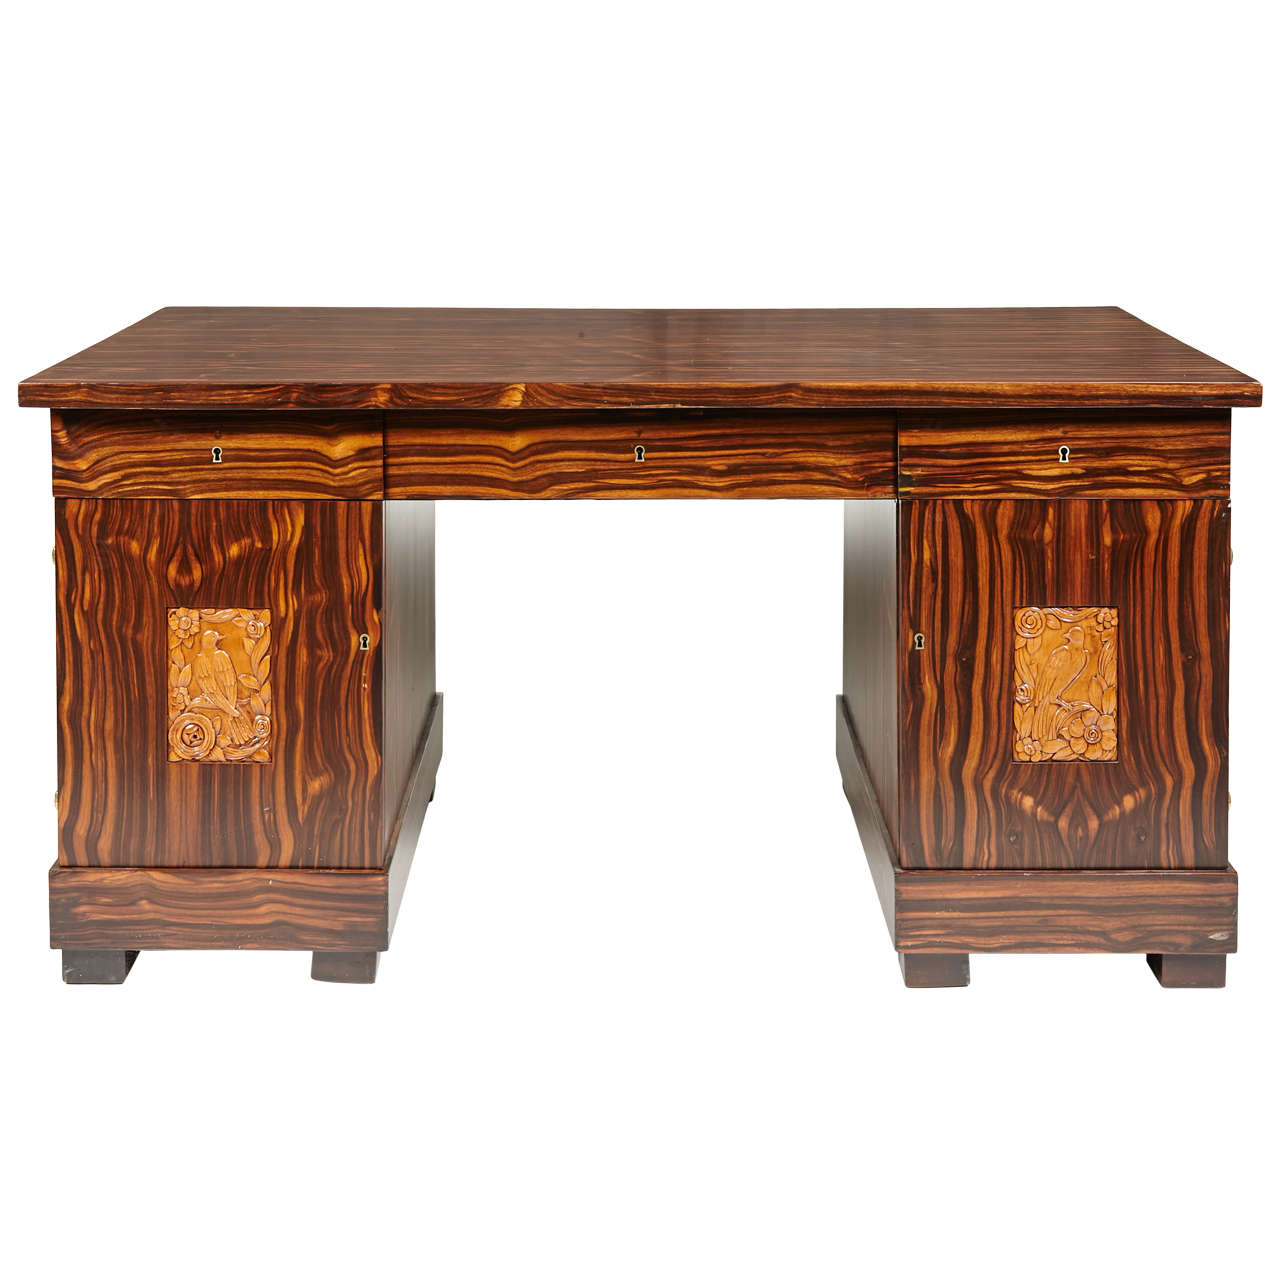 Impressive French Art Deco, Macassar Desk with Inset Carved Panels For Sale